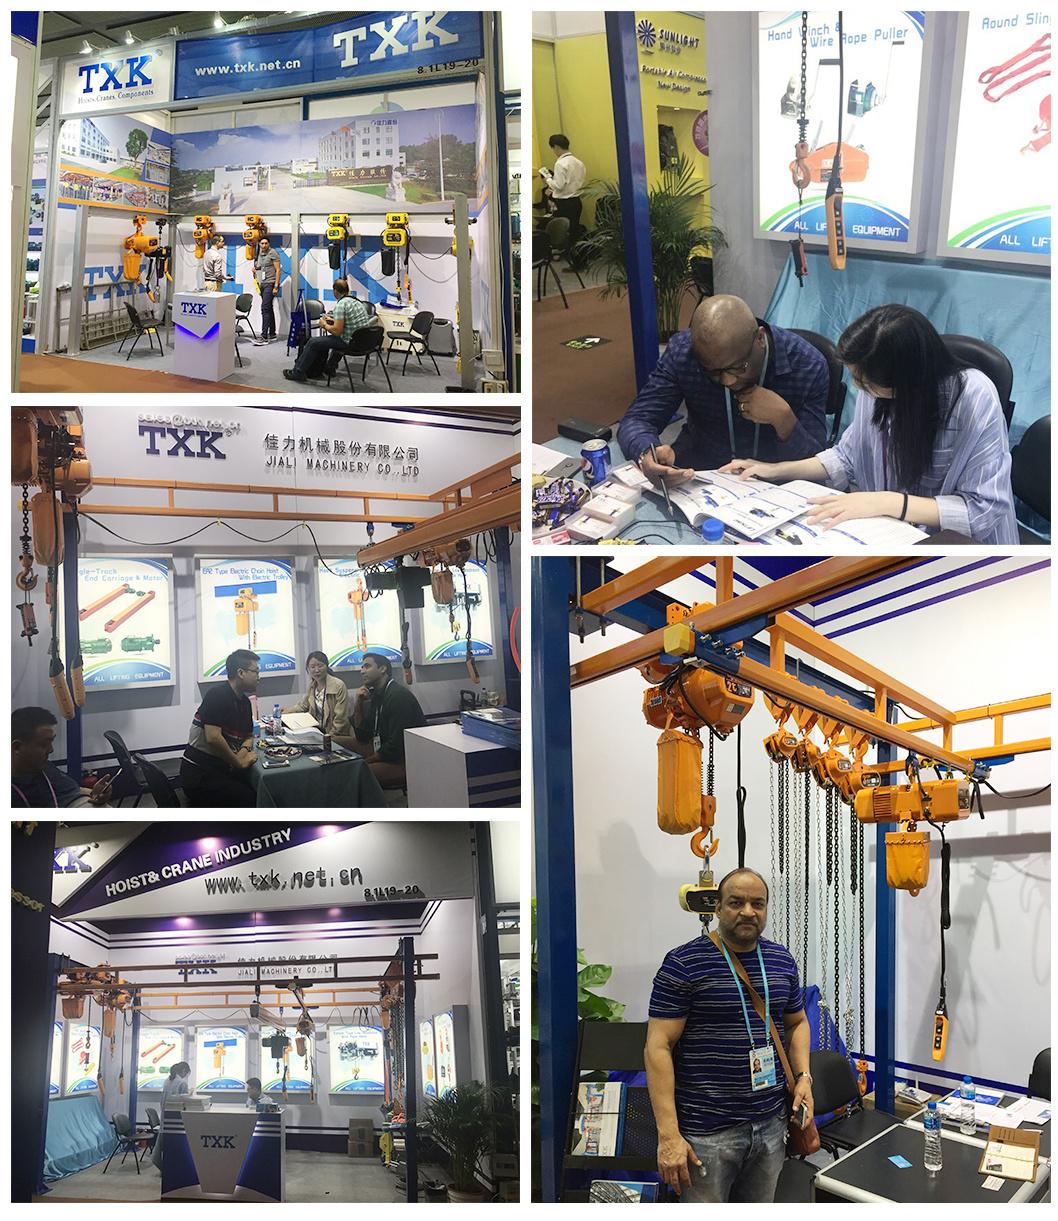 Txk Factory Used 5 Ton Beam Clamps for Hoisting/Pulley Blocks/Crane Beam